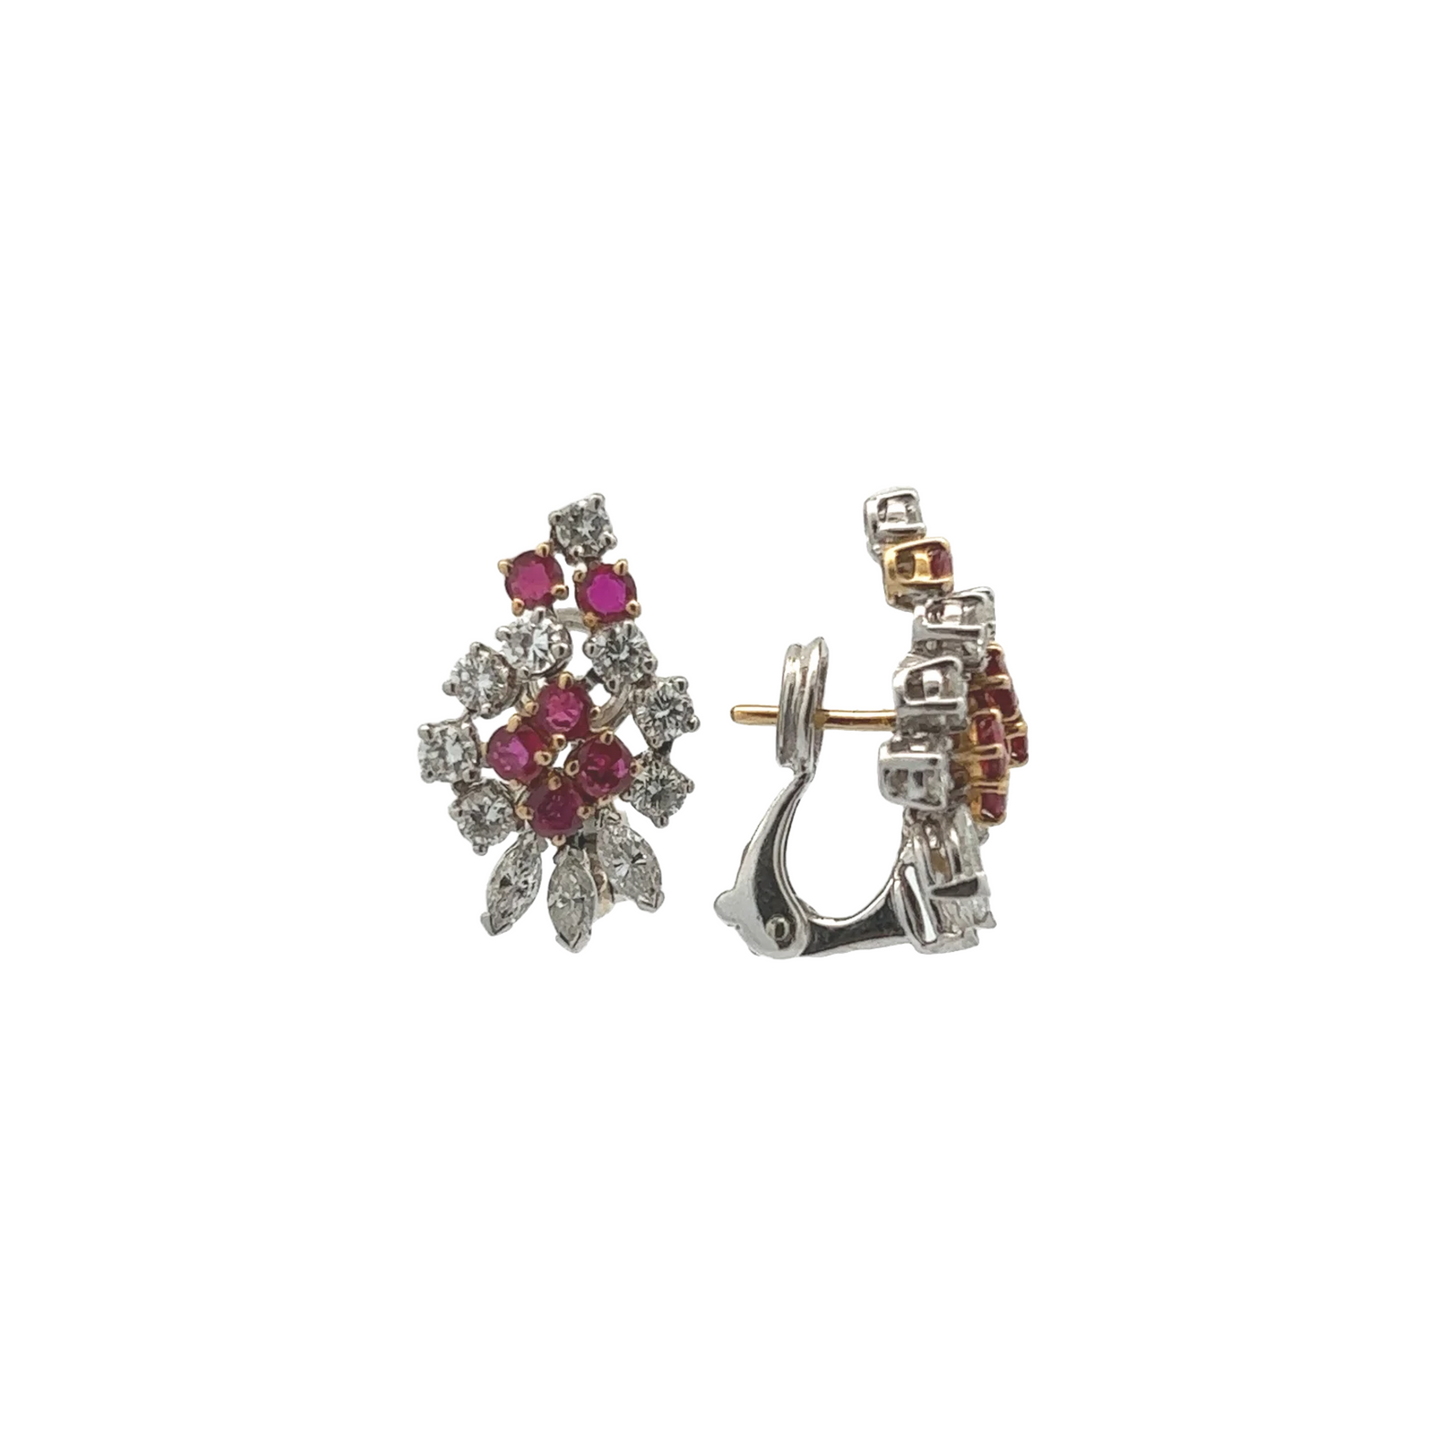 French 1970s Platinum Diamond & Ruby Earrings front and side